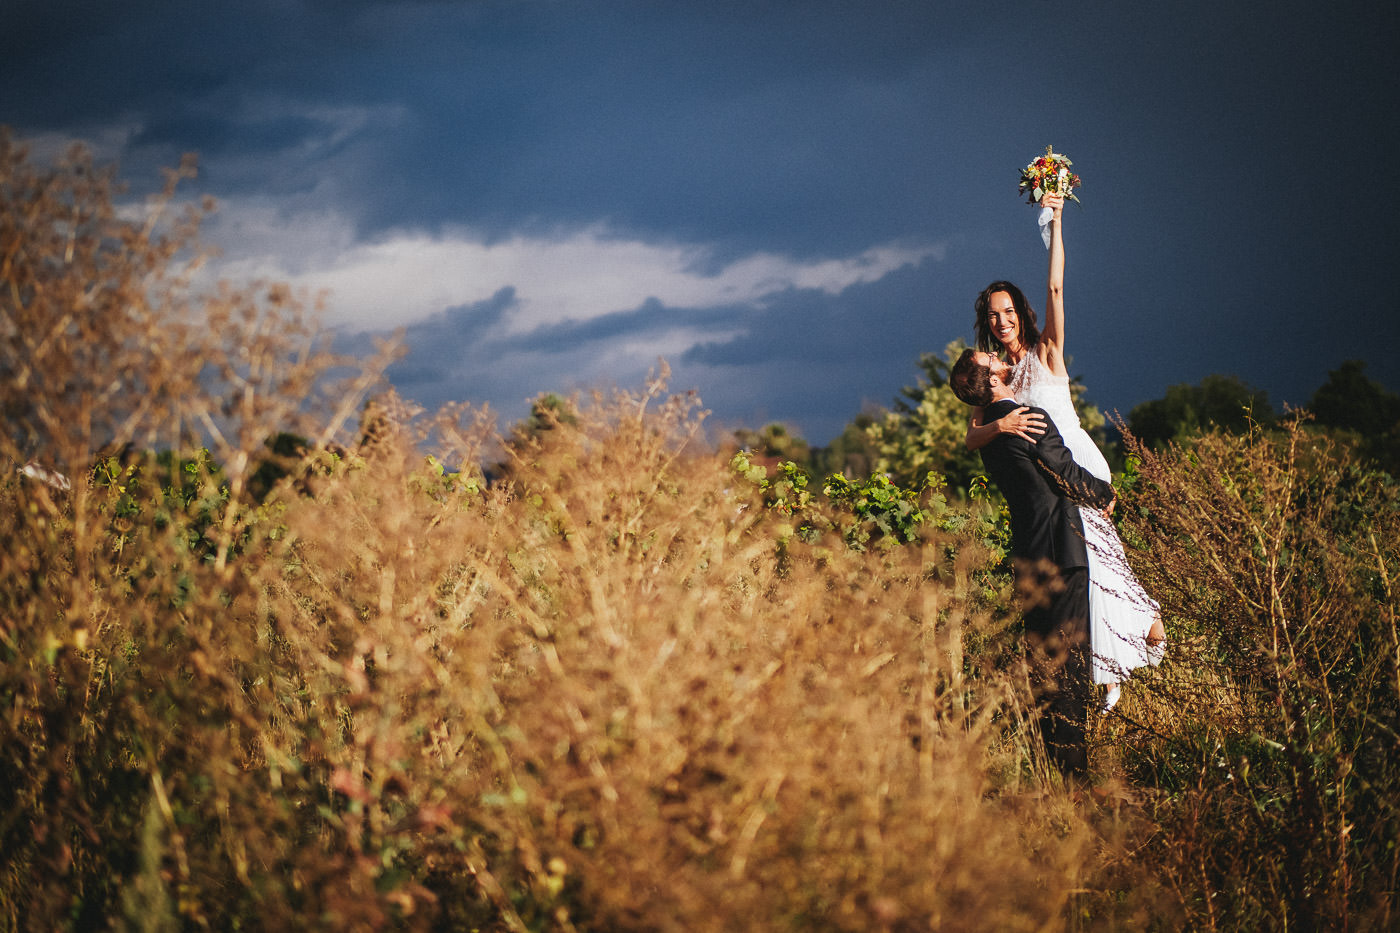 Bridal couple in the bright sunshine in the field after a storm, wedding photos at the Klostermühle in Eltville - wedding photographer Rheingau Brautrausch